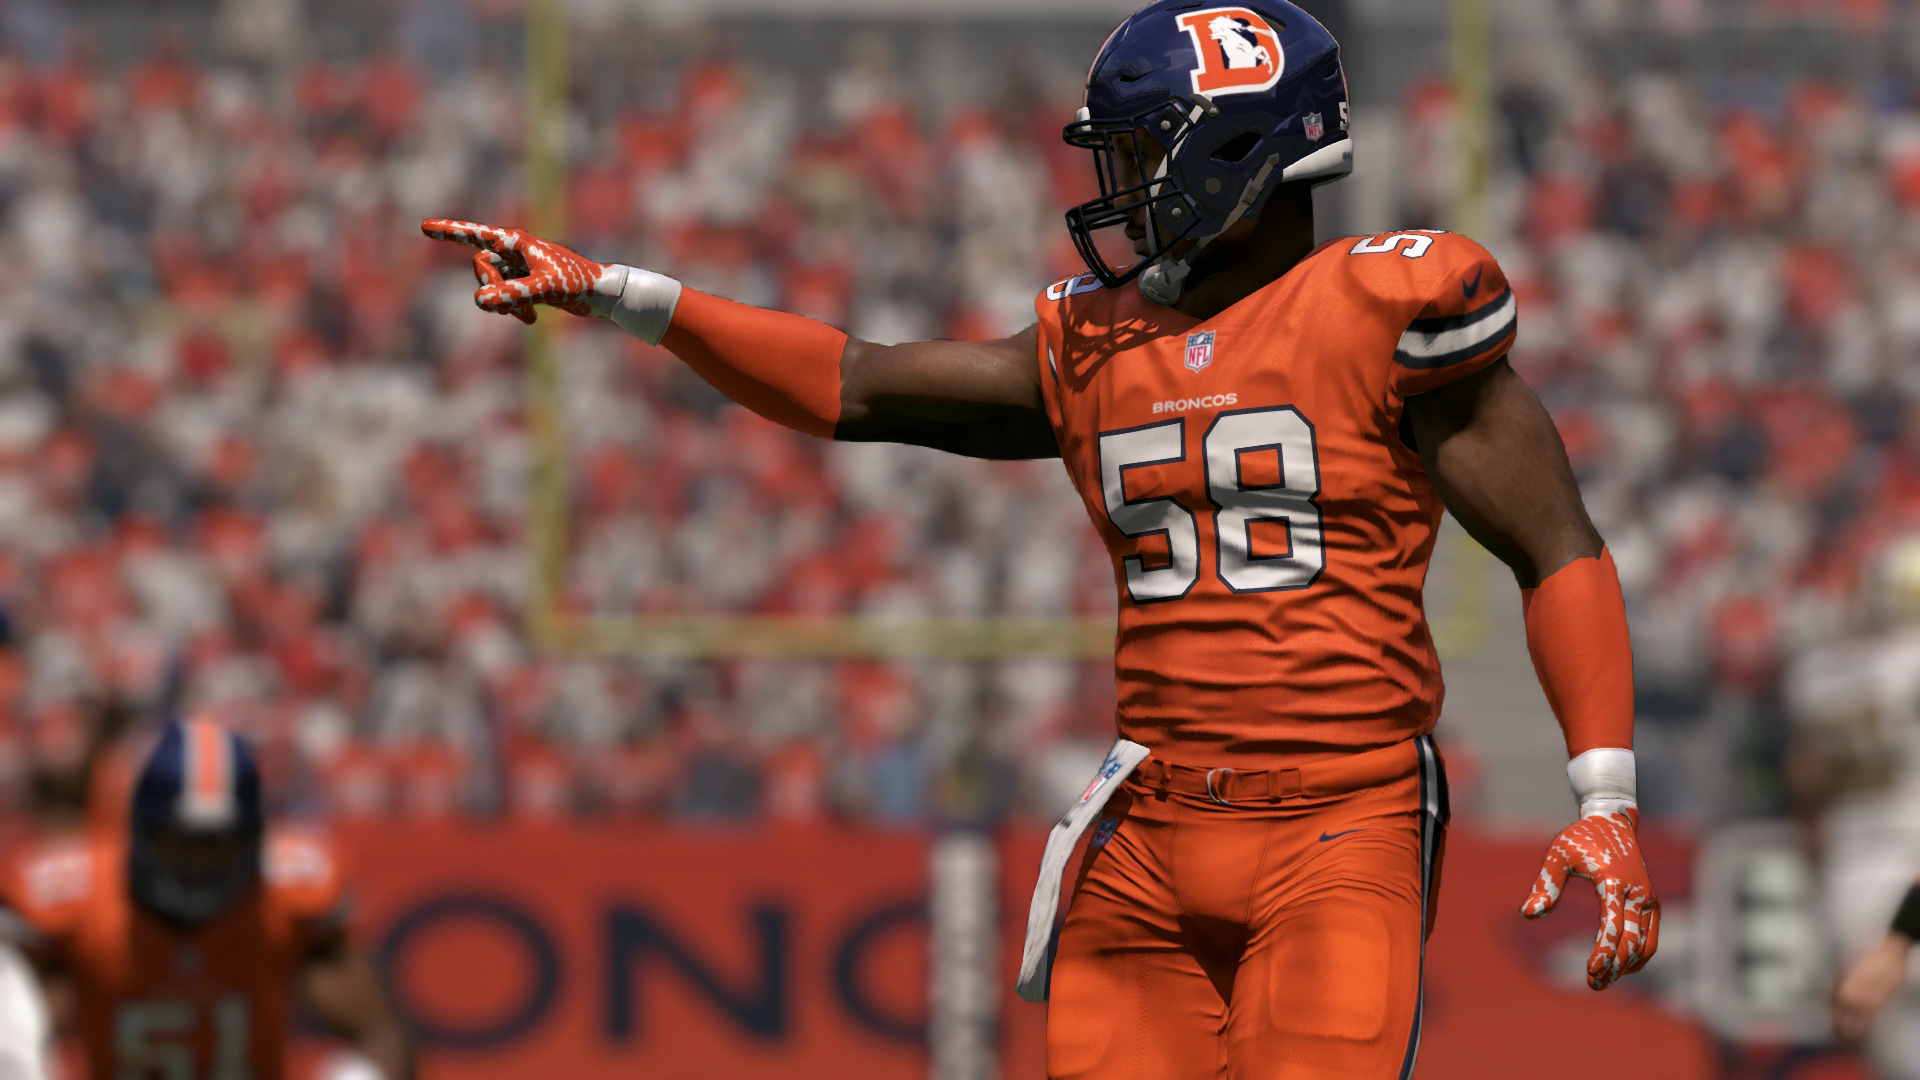 All the Color Rush uniforms have been added to Madden NFL 17